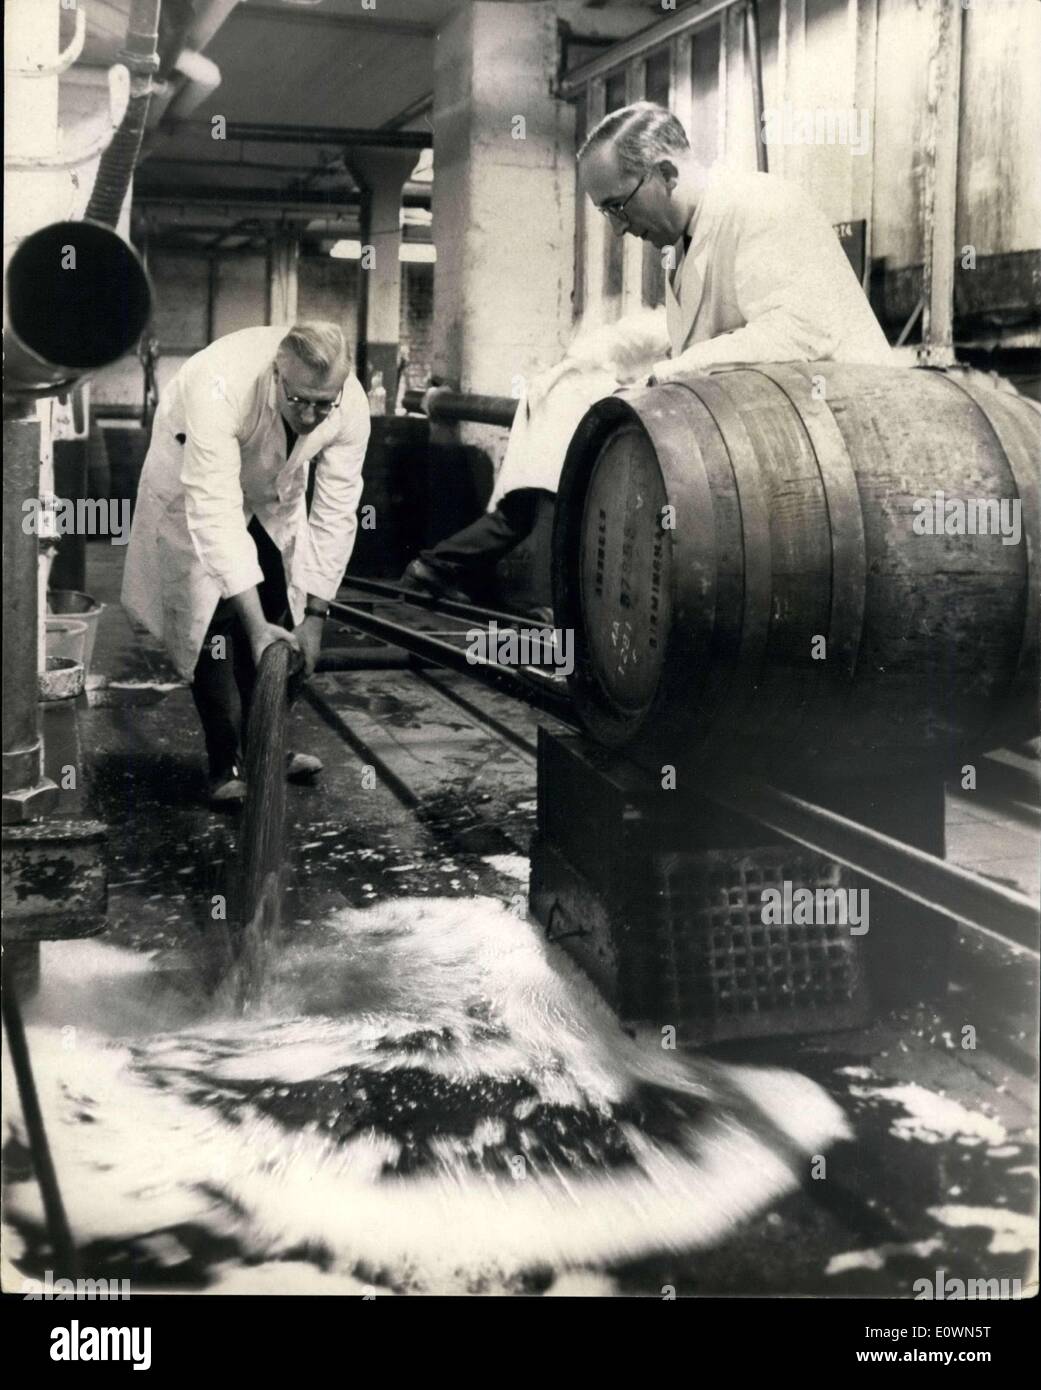 Oct. 05, 1963 - Five million pints of beer wasted because of a strike ? Two hundred and fifty thousand pints of beer went down the drain yesterday at Ansell?s Brewery at Birmingham and it is to be followed by another five million pints within the next few days. The reason? Said the spokesman for the firm: The beer has become spoiled because 1,300 production and transport workers at the brewery went on strike claiming that a cellarman shop steward had been victimized. Photo Shows: Some of the beer going down the drain at the brewery yesterday. Keystone Stock Photo